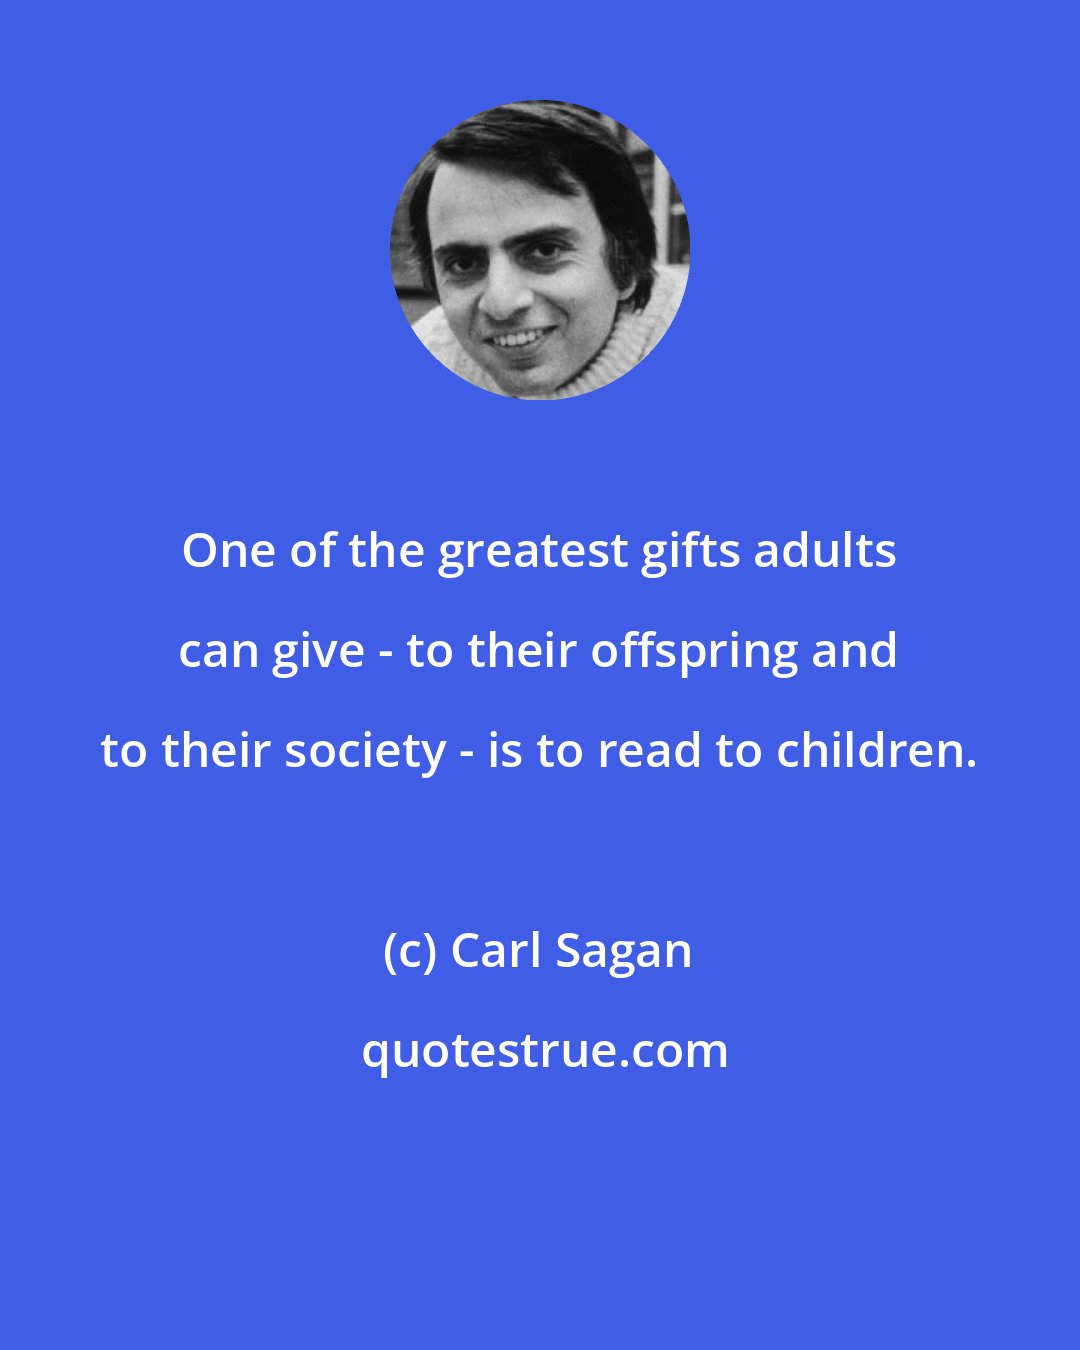 Carl Sagan: One of the greatest gifts adults can give - to their offspring and to their society - is to read to children.